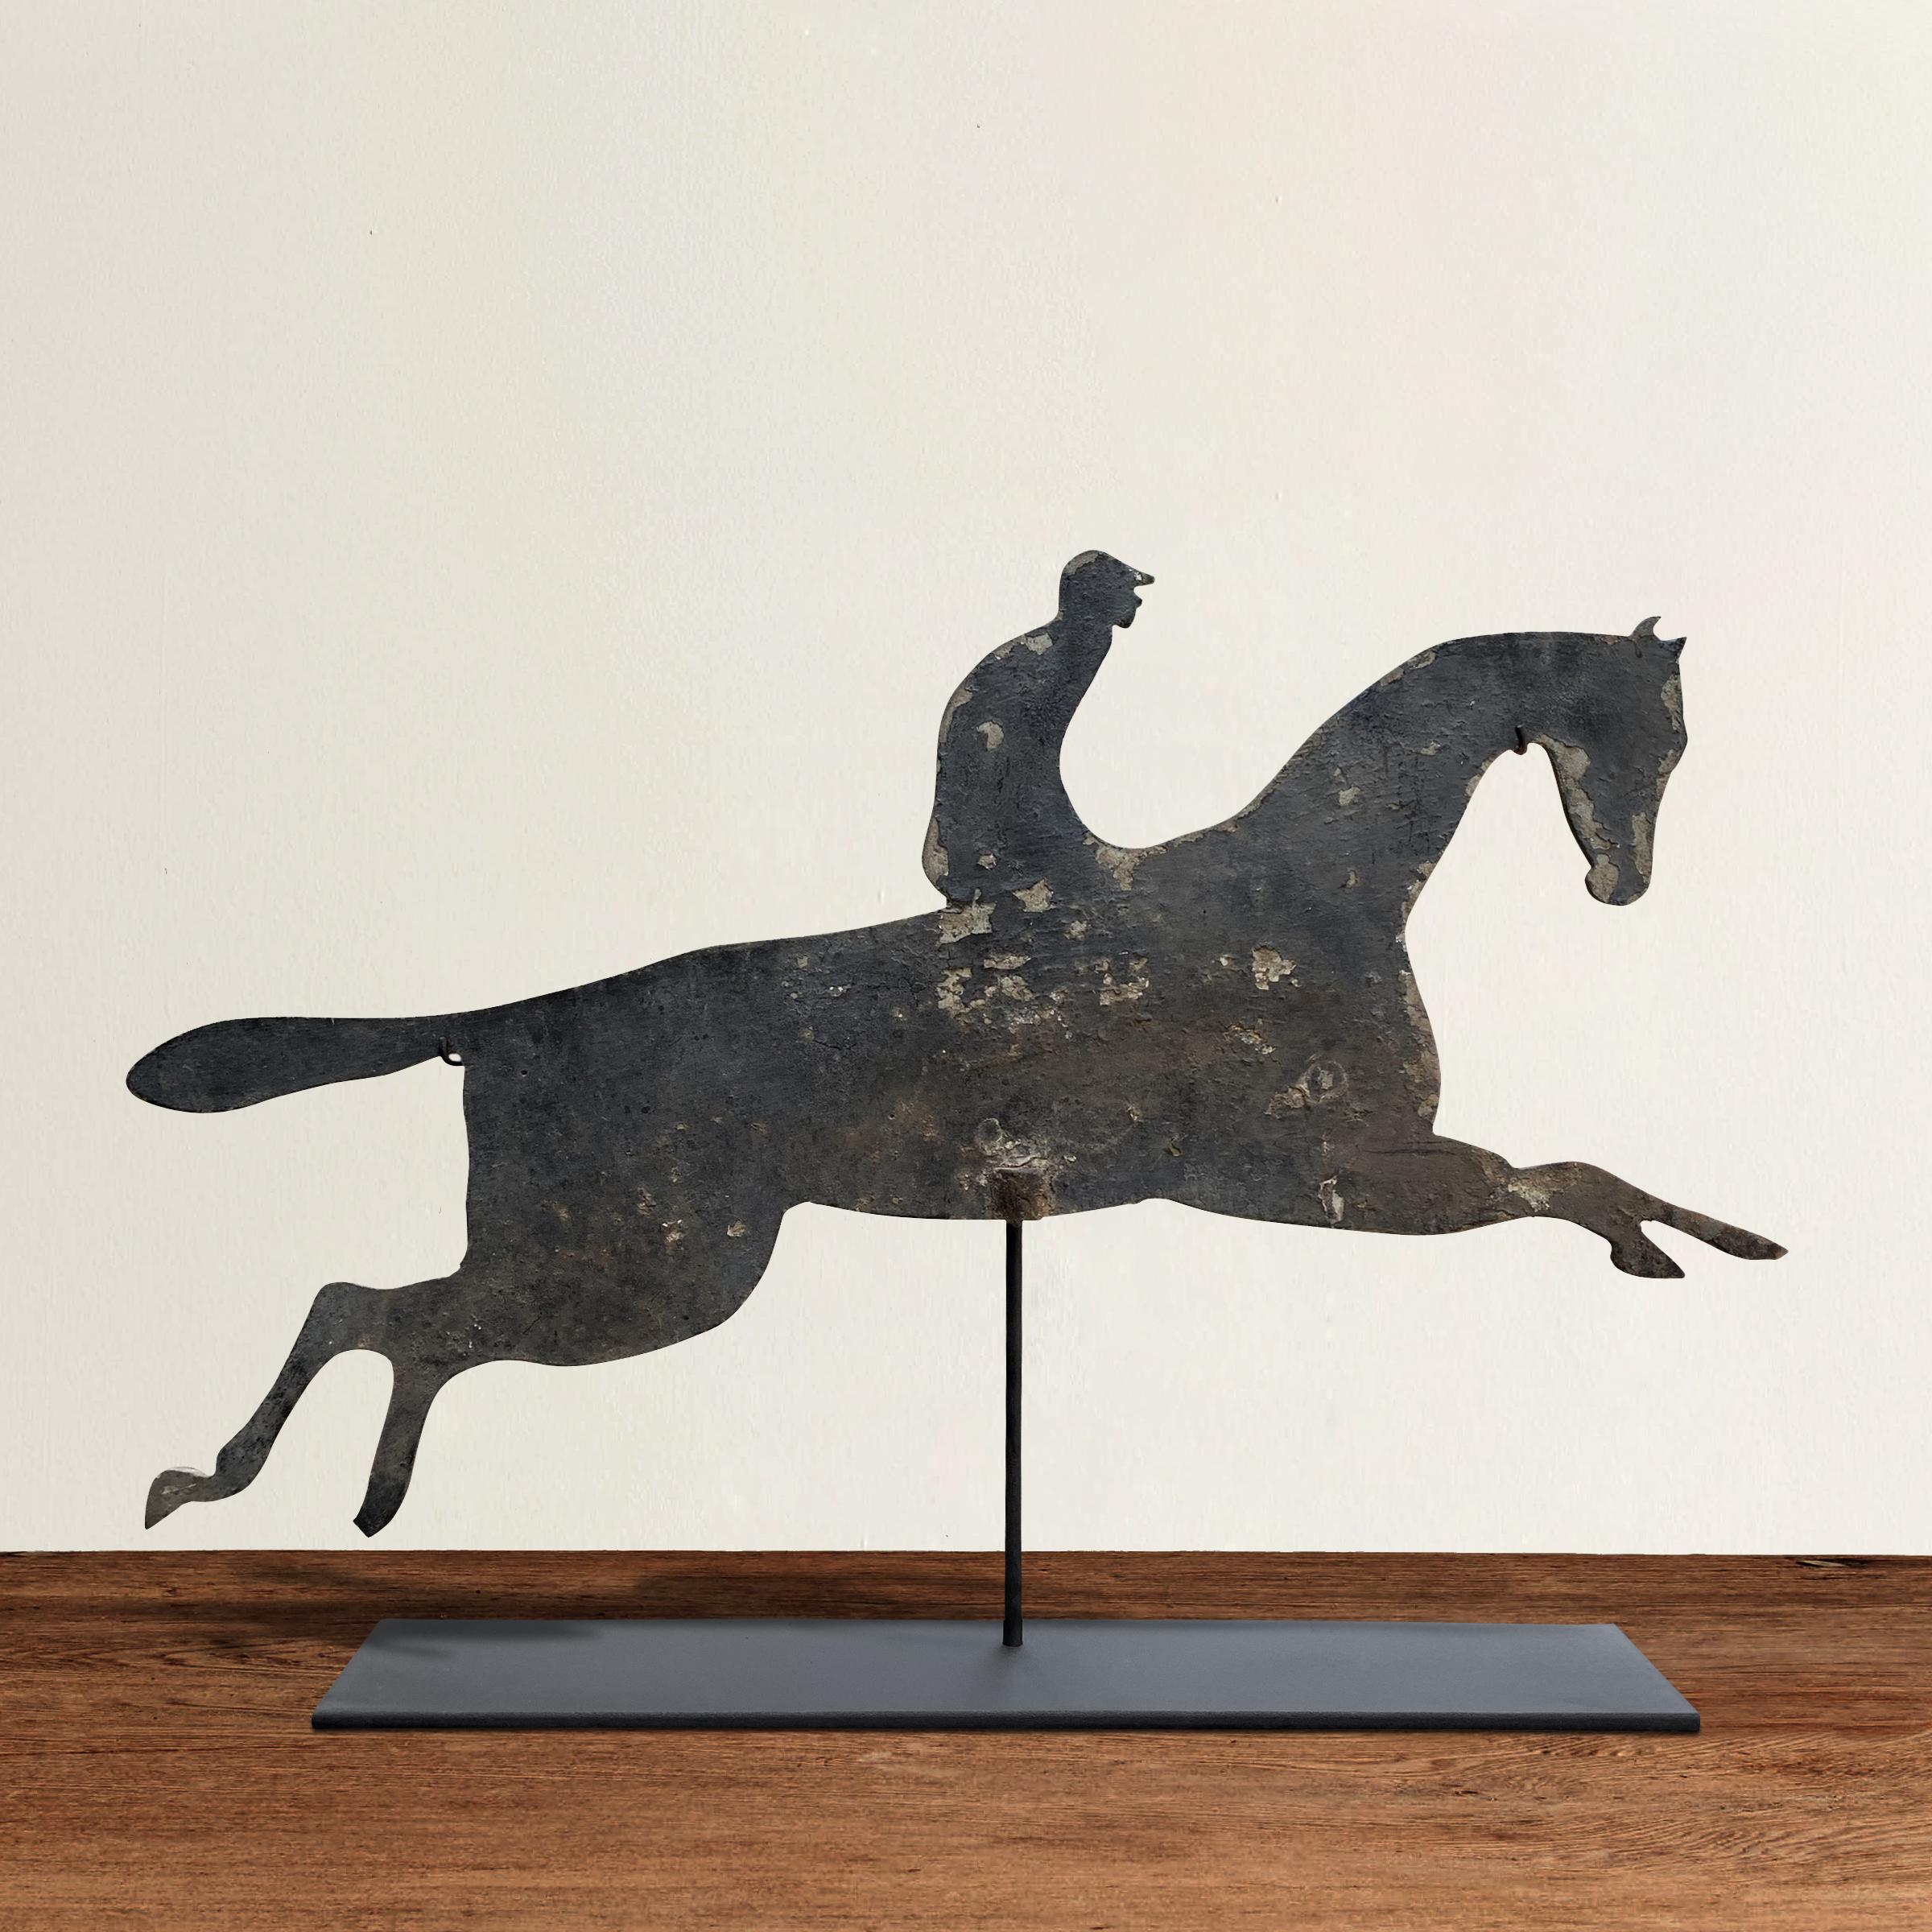 A fun and whimsical early 20th century American aluminum horse and jockey silhouette weathervane mounted on custom steel stand. Traces of original gray paint remain.